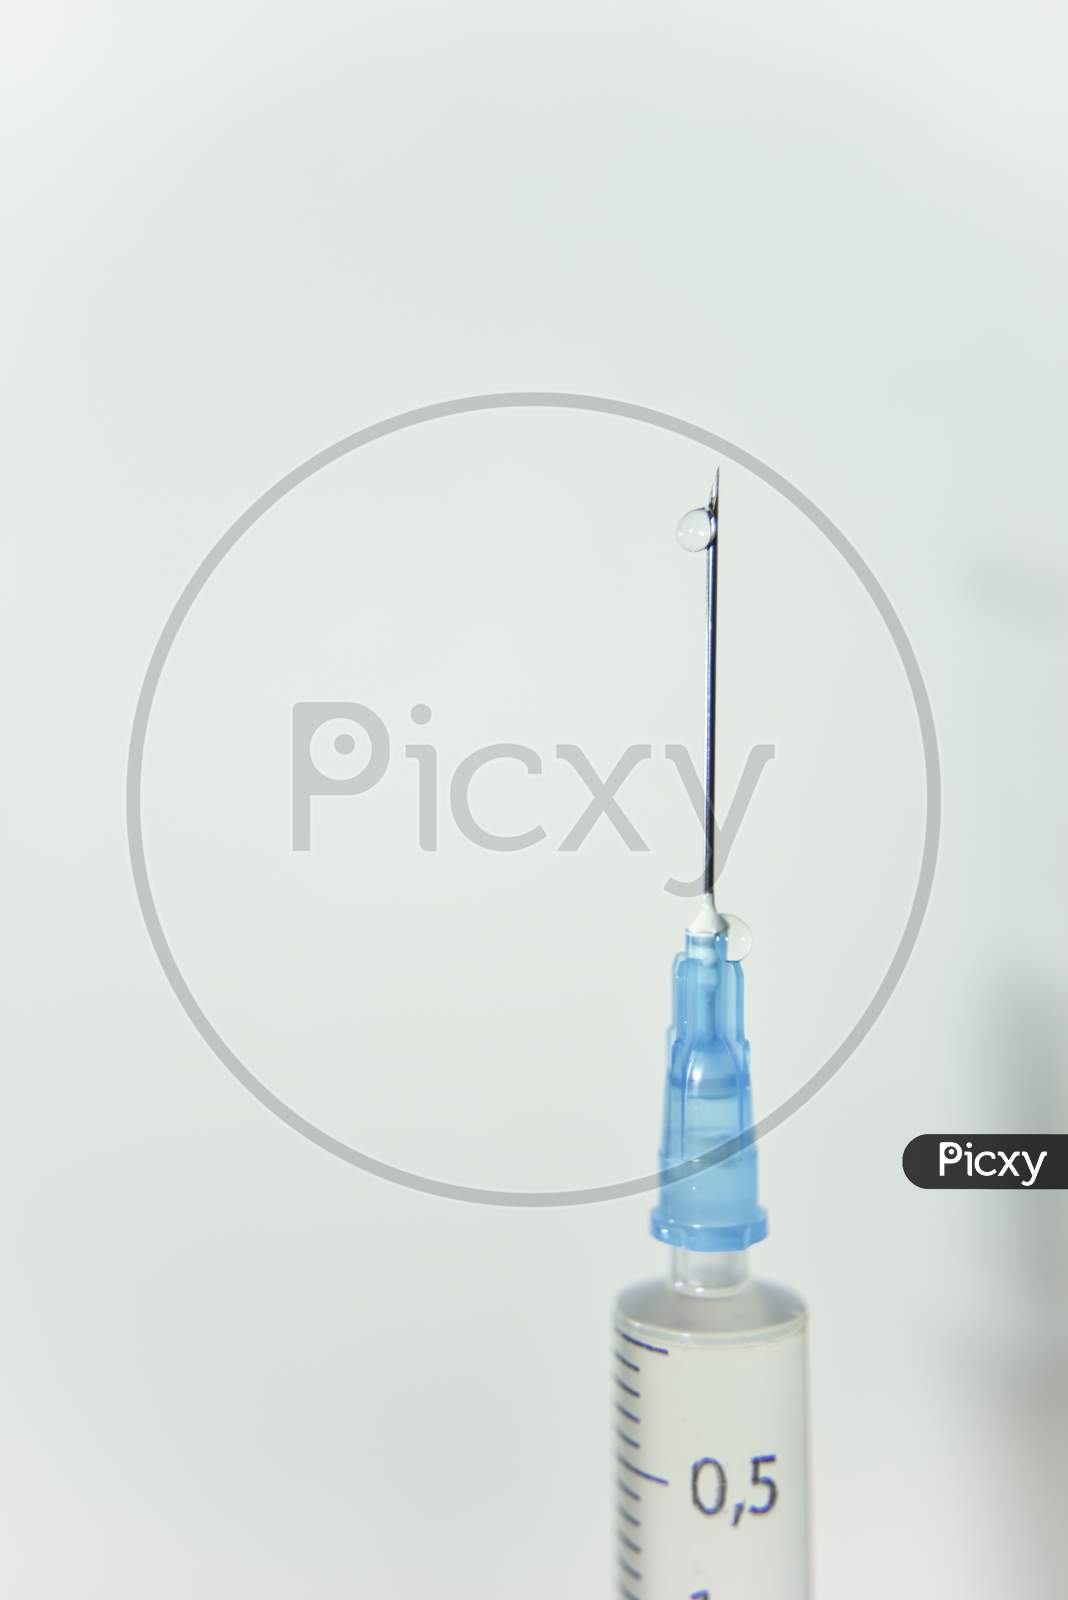 Clear Drop Of The Vaccine On The Top Of The Needle Of Syringe On The White Background